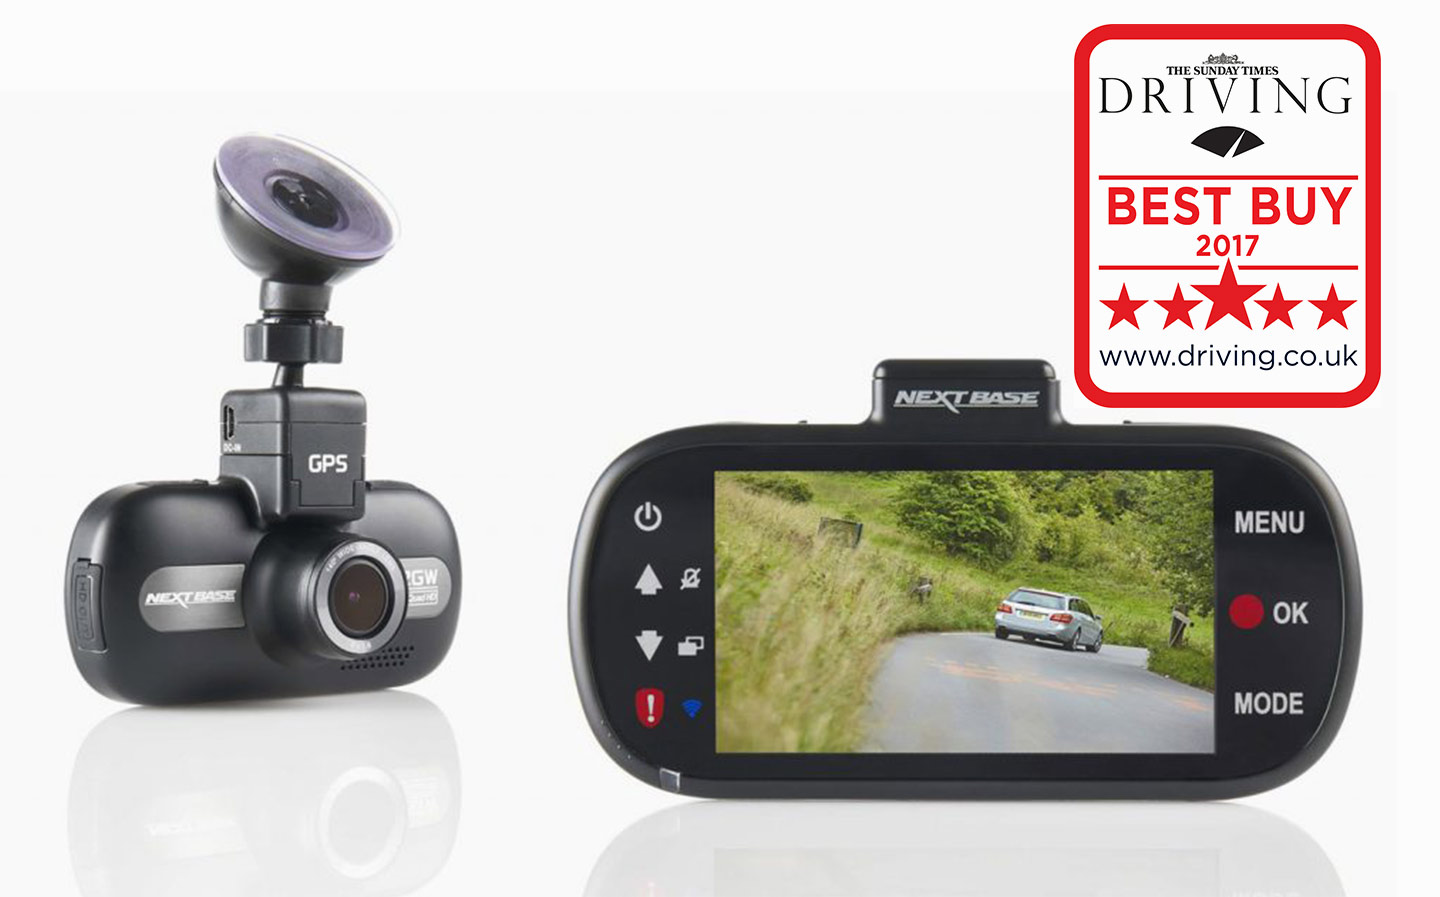 Nextbase 512GW review: Sunday Times Driving's best buy dash cam 2017